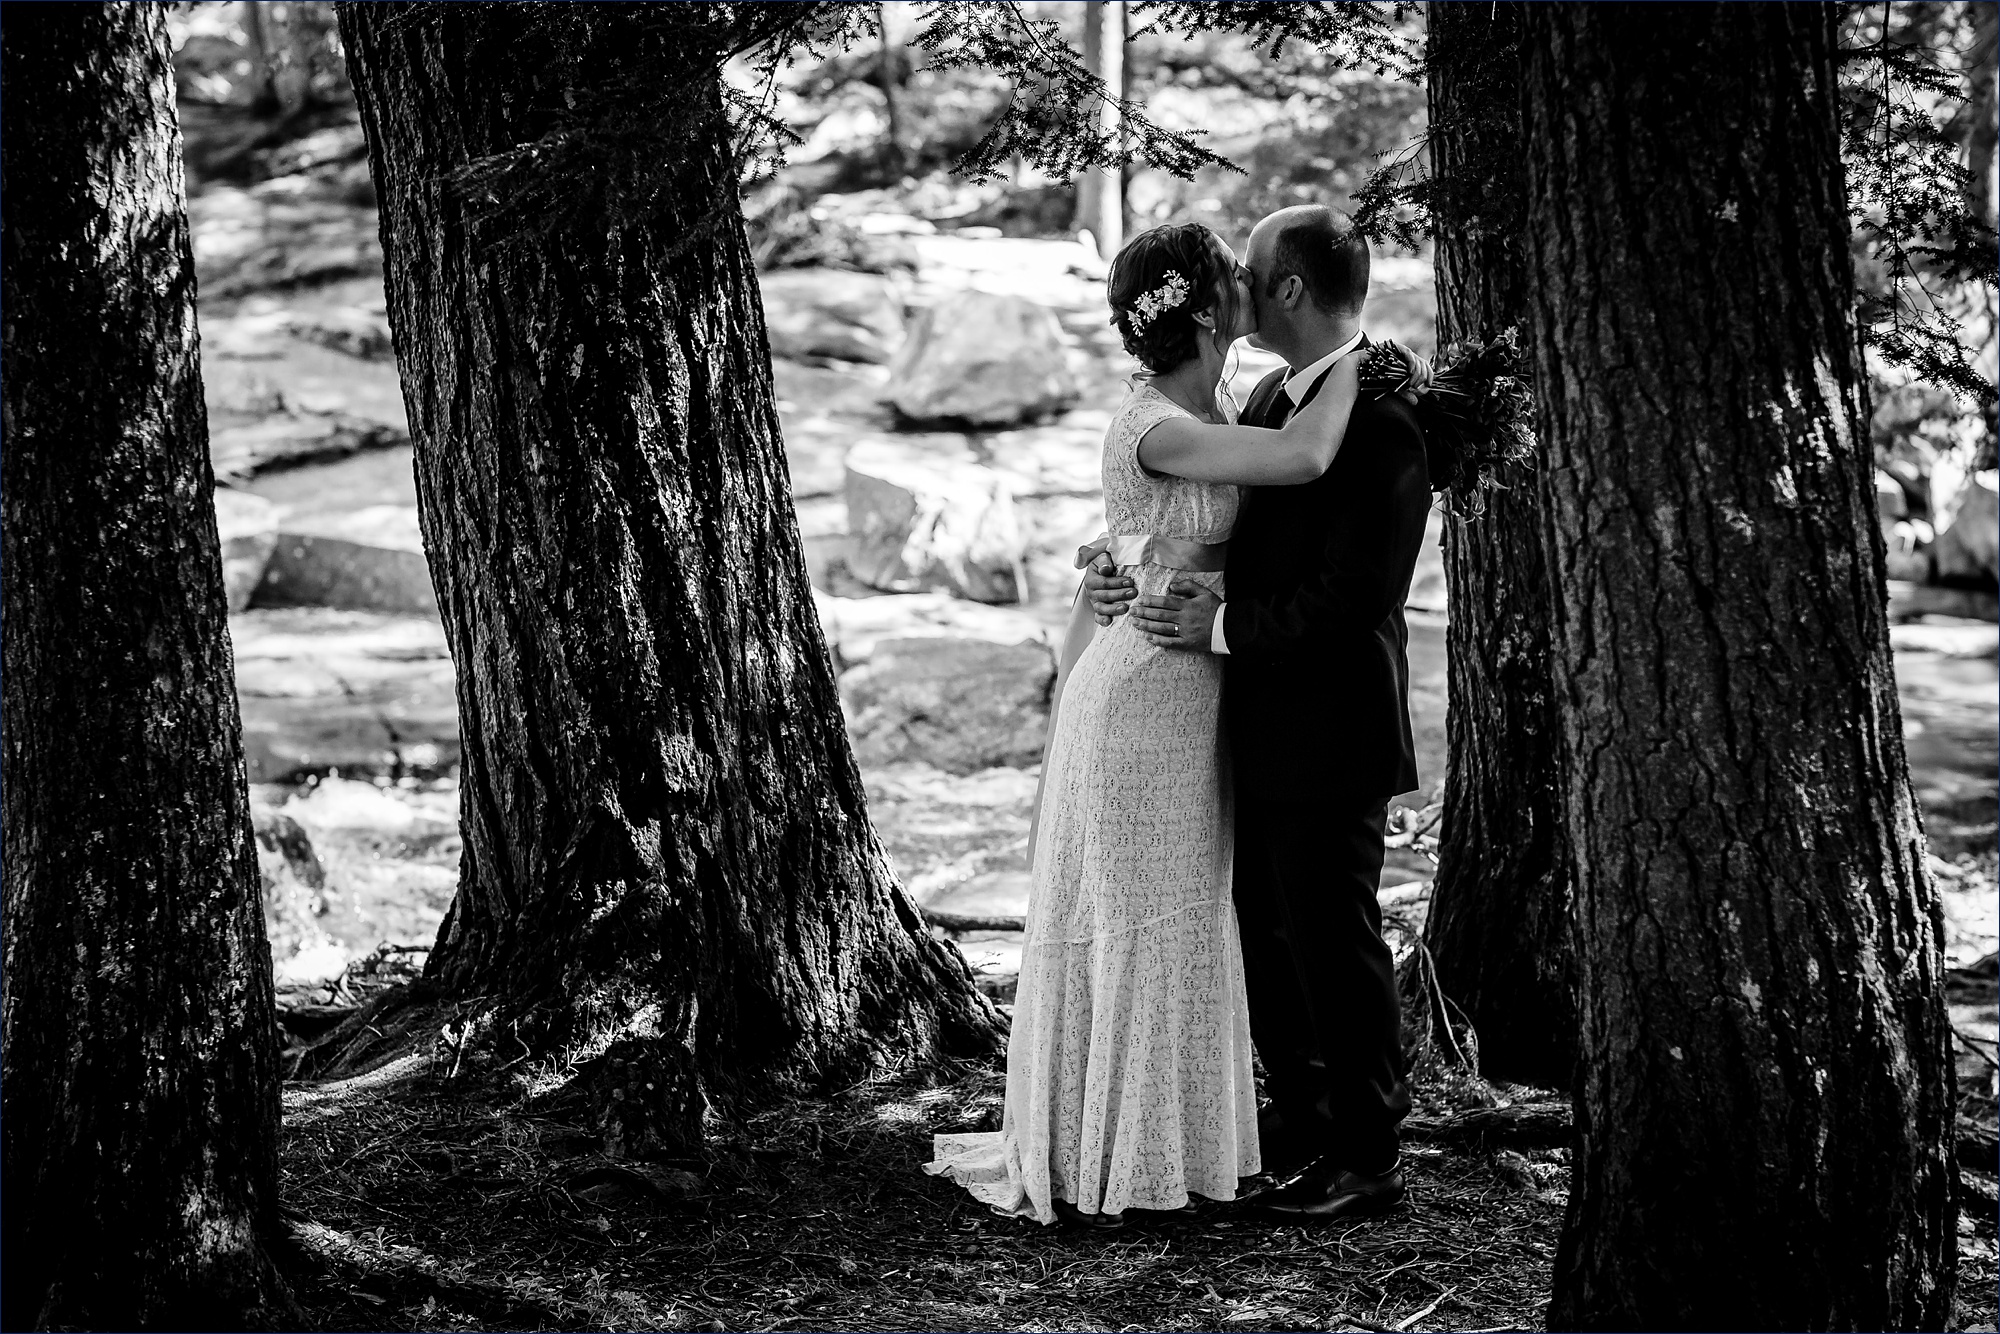 The bride and groom hold each other close by the Jackson Falls in New Hampshire after eloping